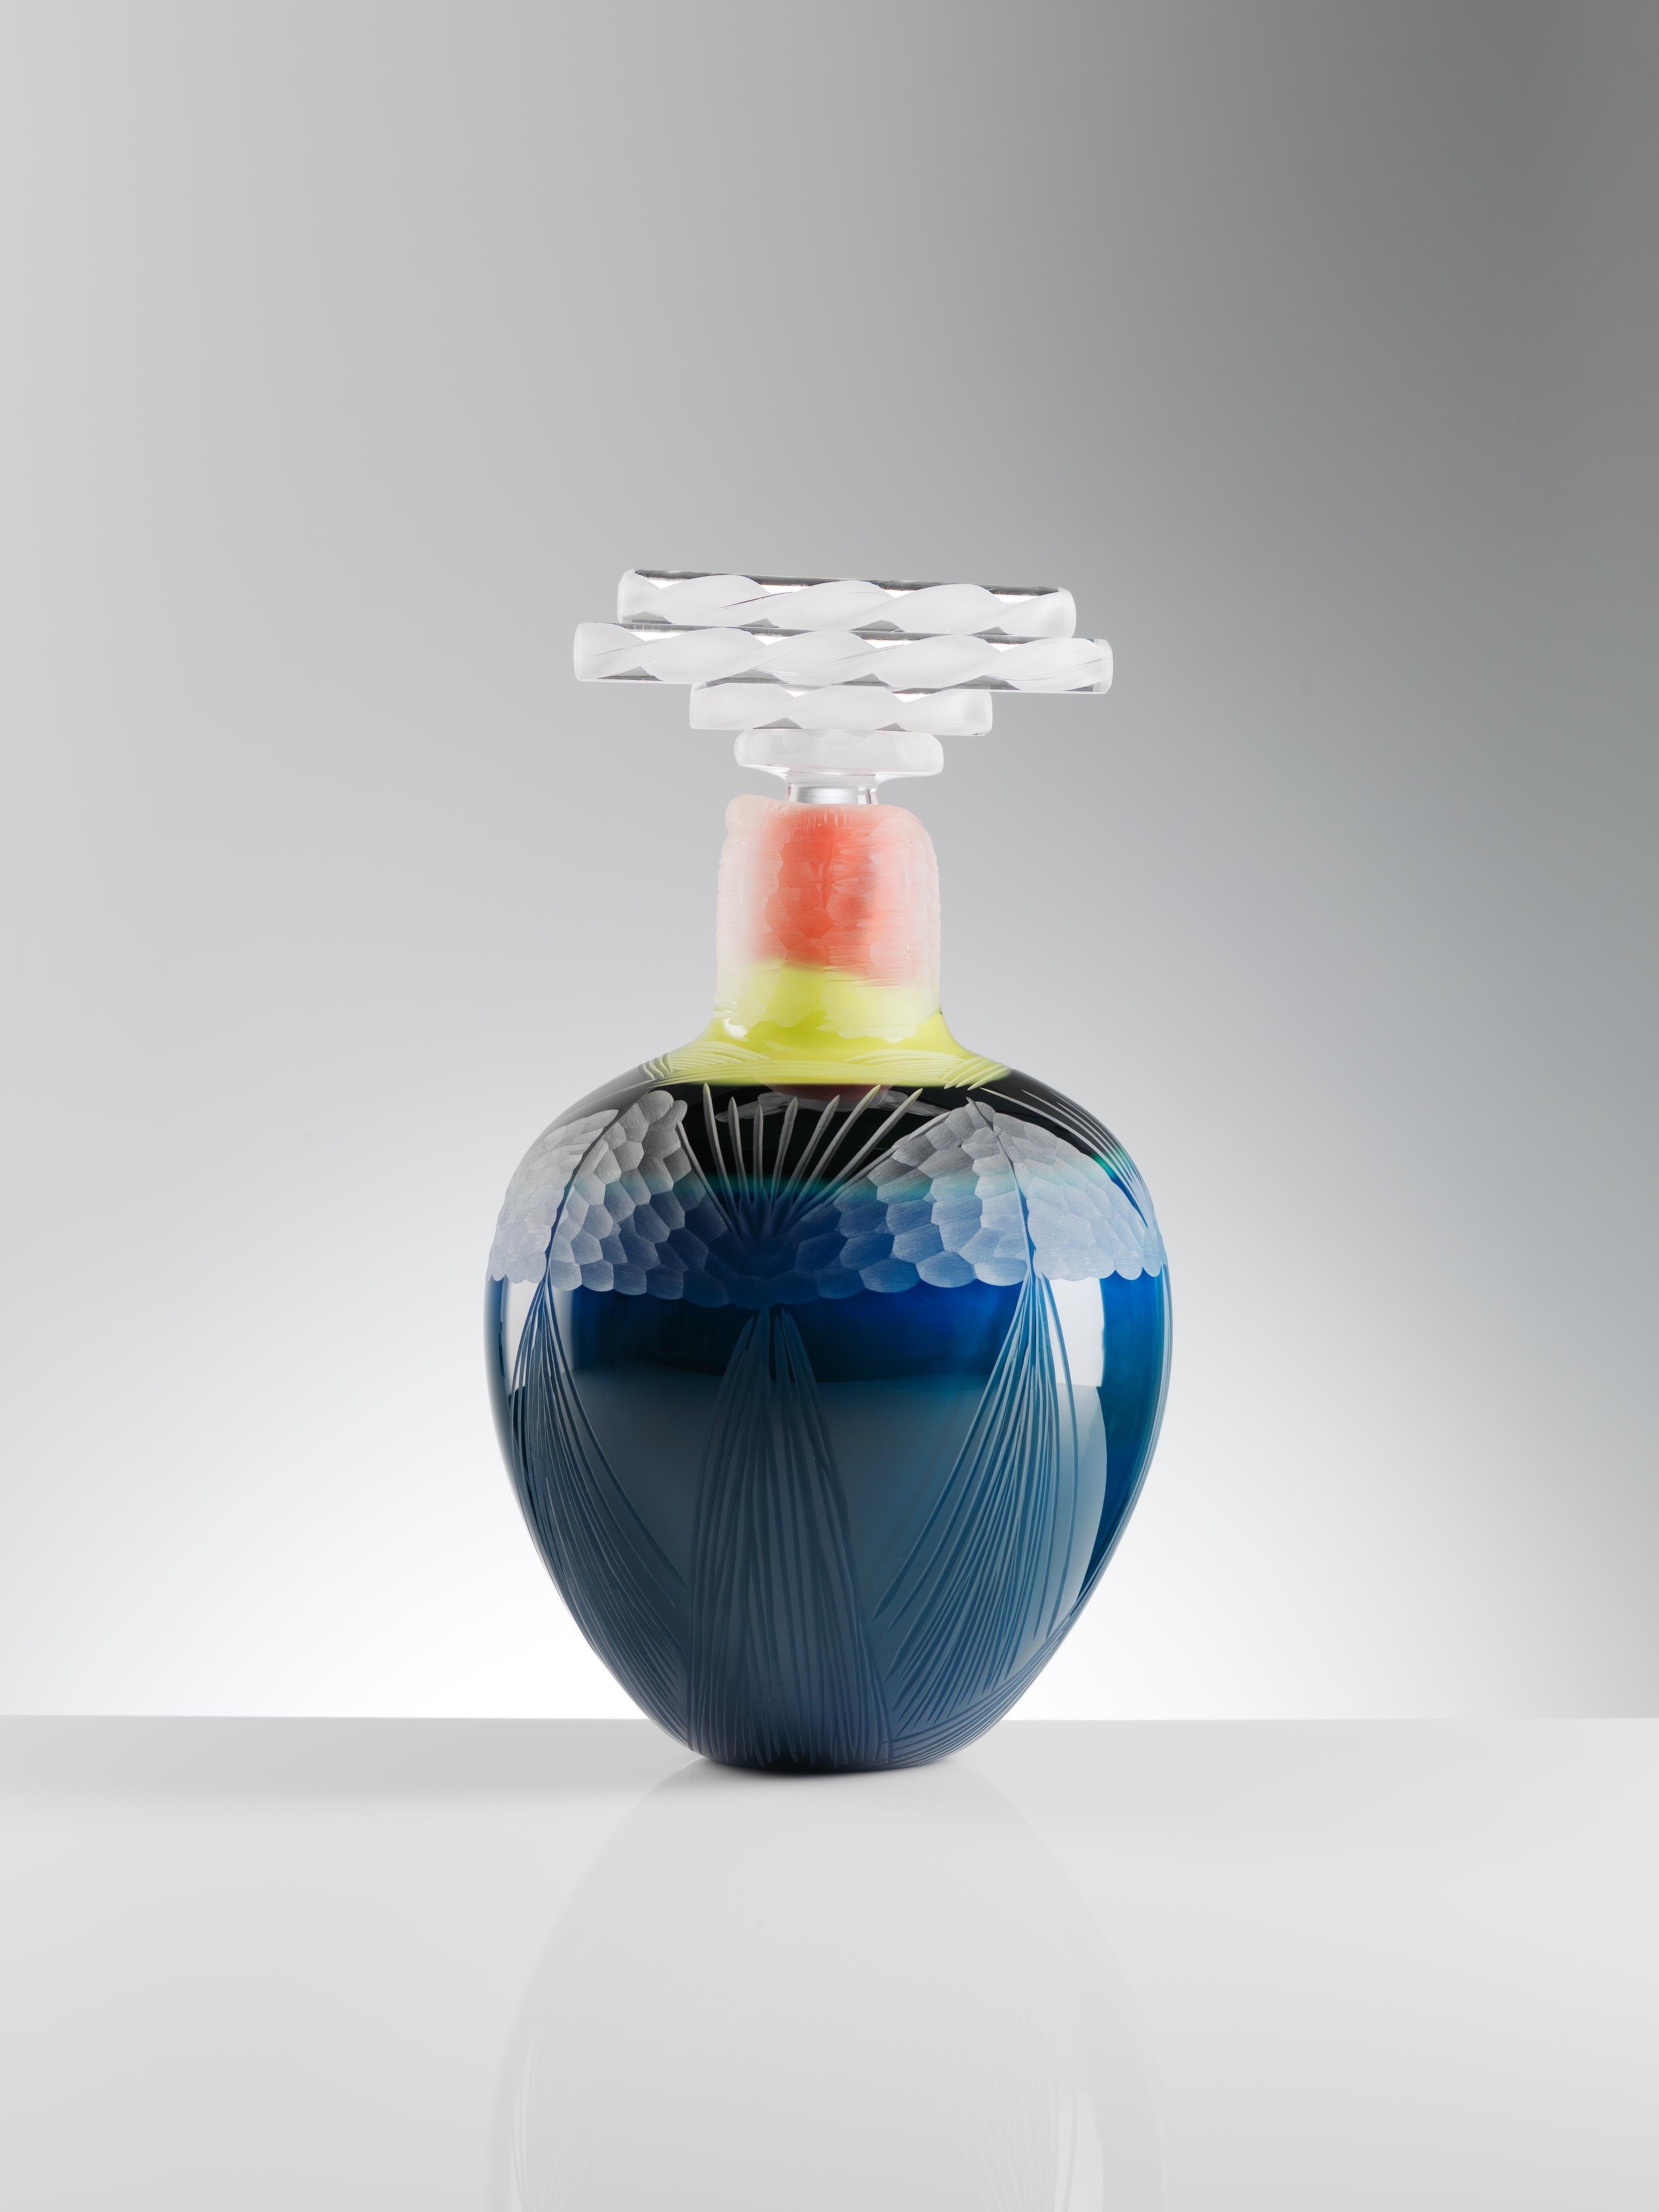 Peacock Solace4 sculpted blown glass vase handmade by Juli Bolaños-Durman
Solace Collection 2016 - 2017
One of a Kind
Dimensions: 11.8 x 6.7 x 6.7 inches
Materials: Found & blown glass with cuttings

This piece is made of two parts: stopper